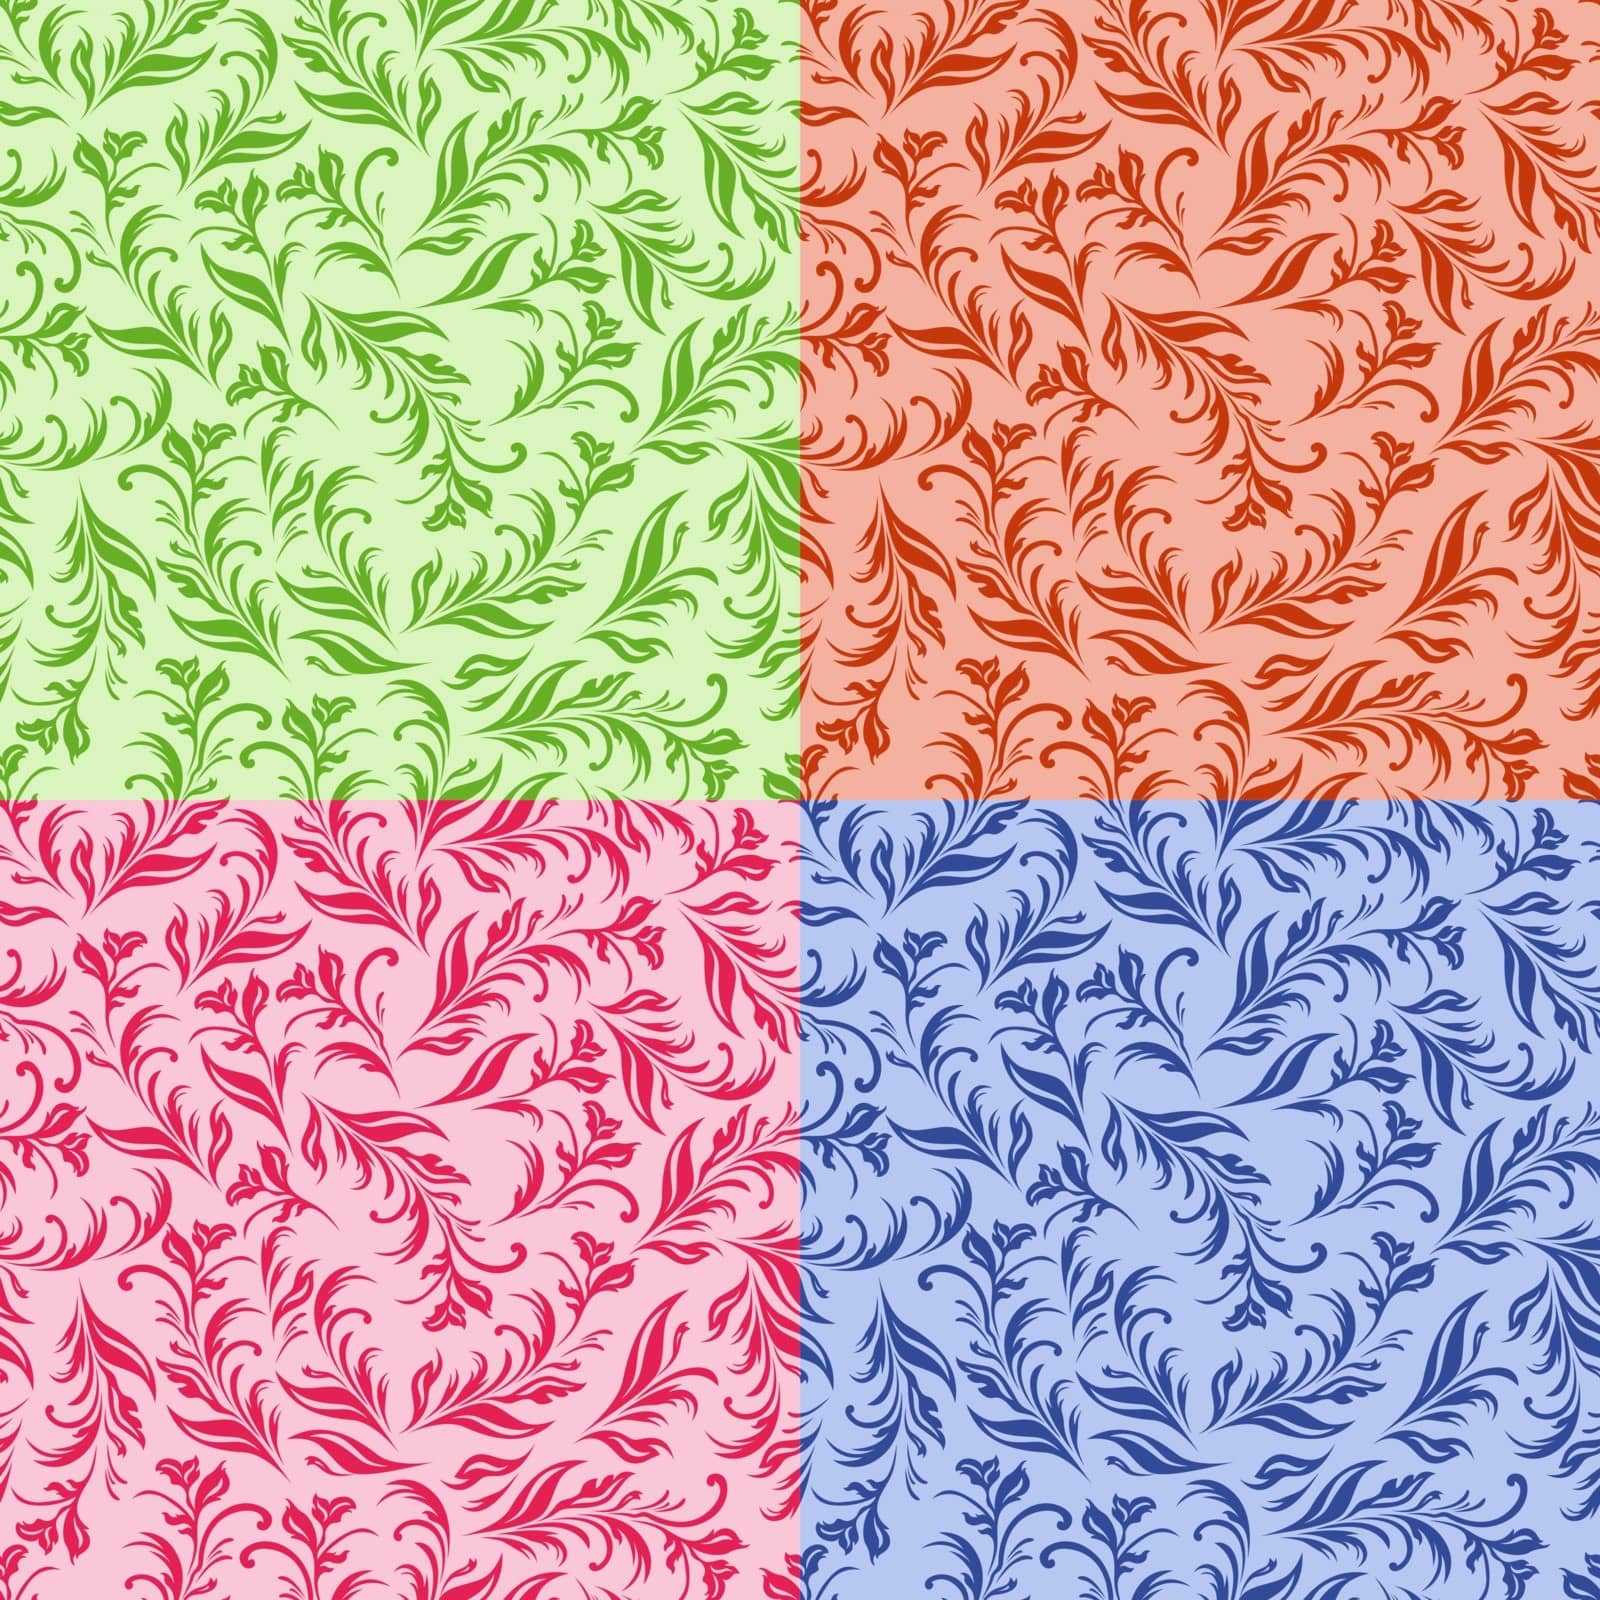 Four similar stylized swirl floral patterns in different colors, hand drawing vector illustration